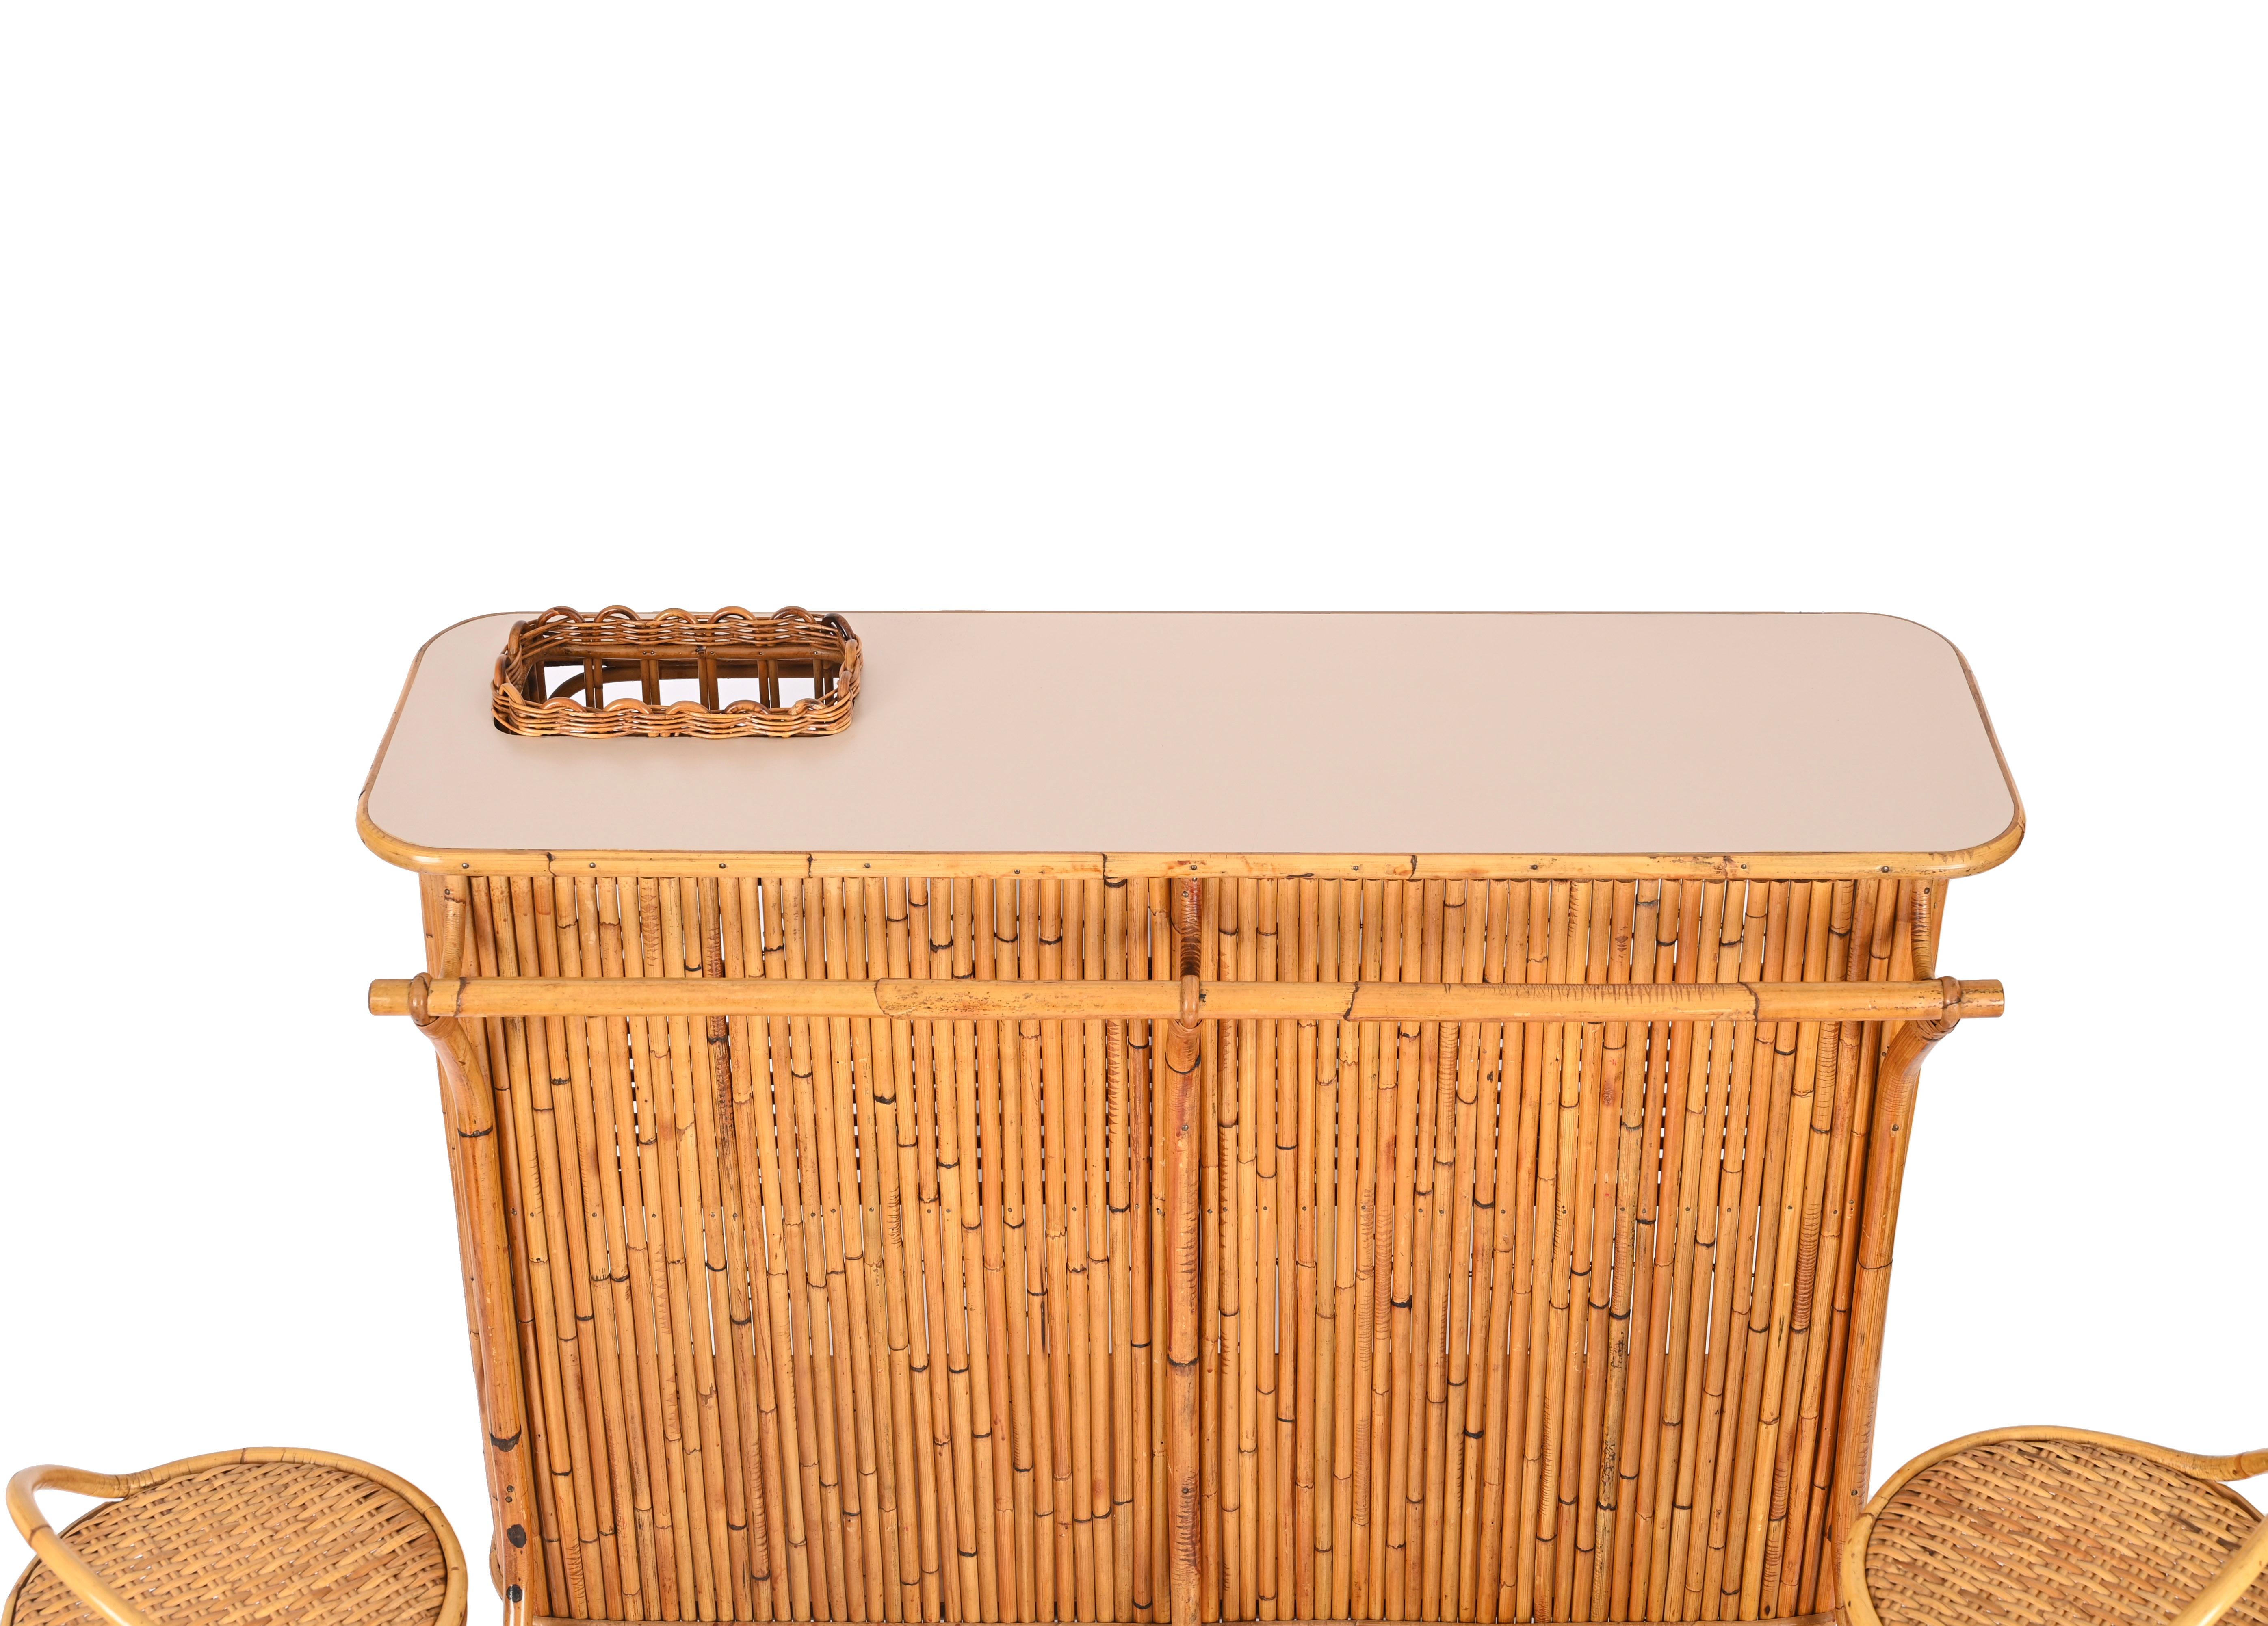 Dry Bar with Two Stools in Rattan, Bamboo and Wicker by Tito Agnoli, Italy 1950s For Sale 2